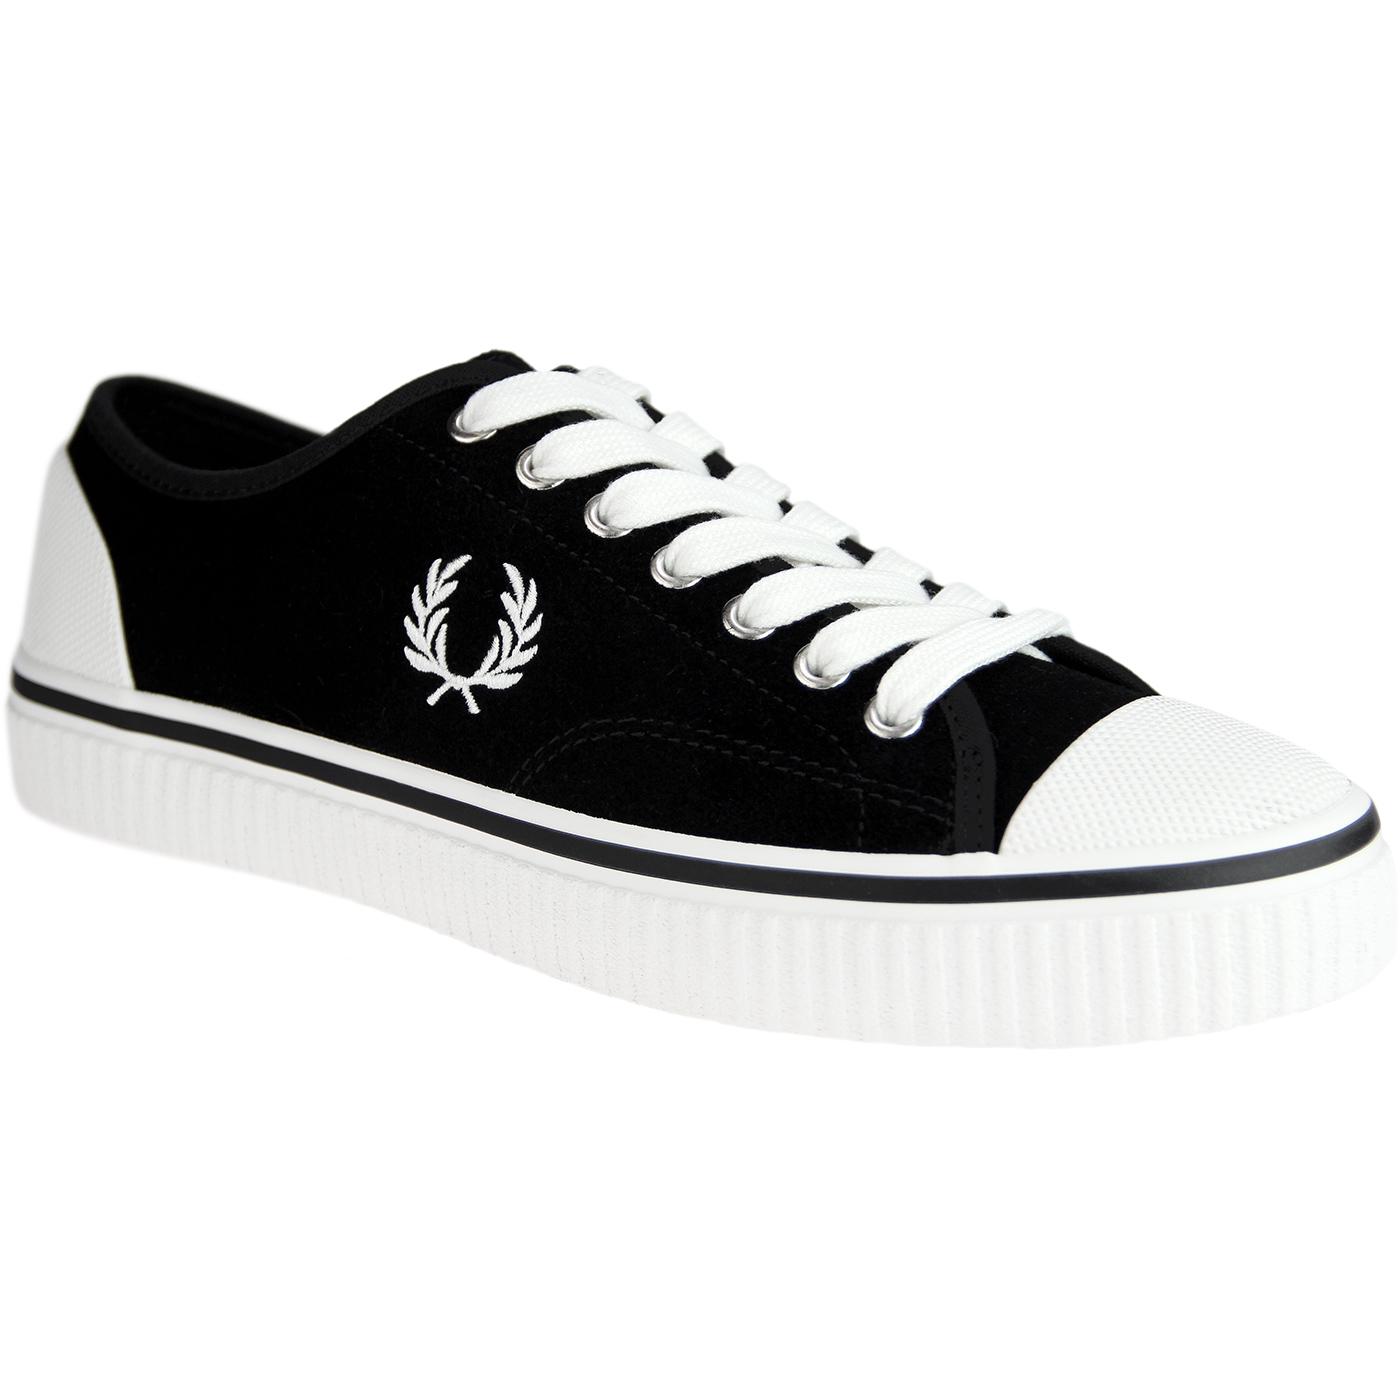 FRED PERRY Hughes Retro Indie Low Suede Trainers in Black